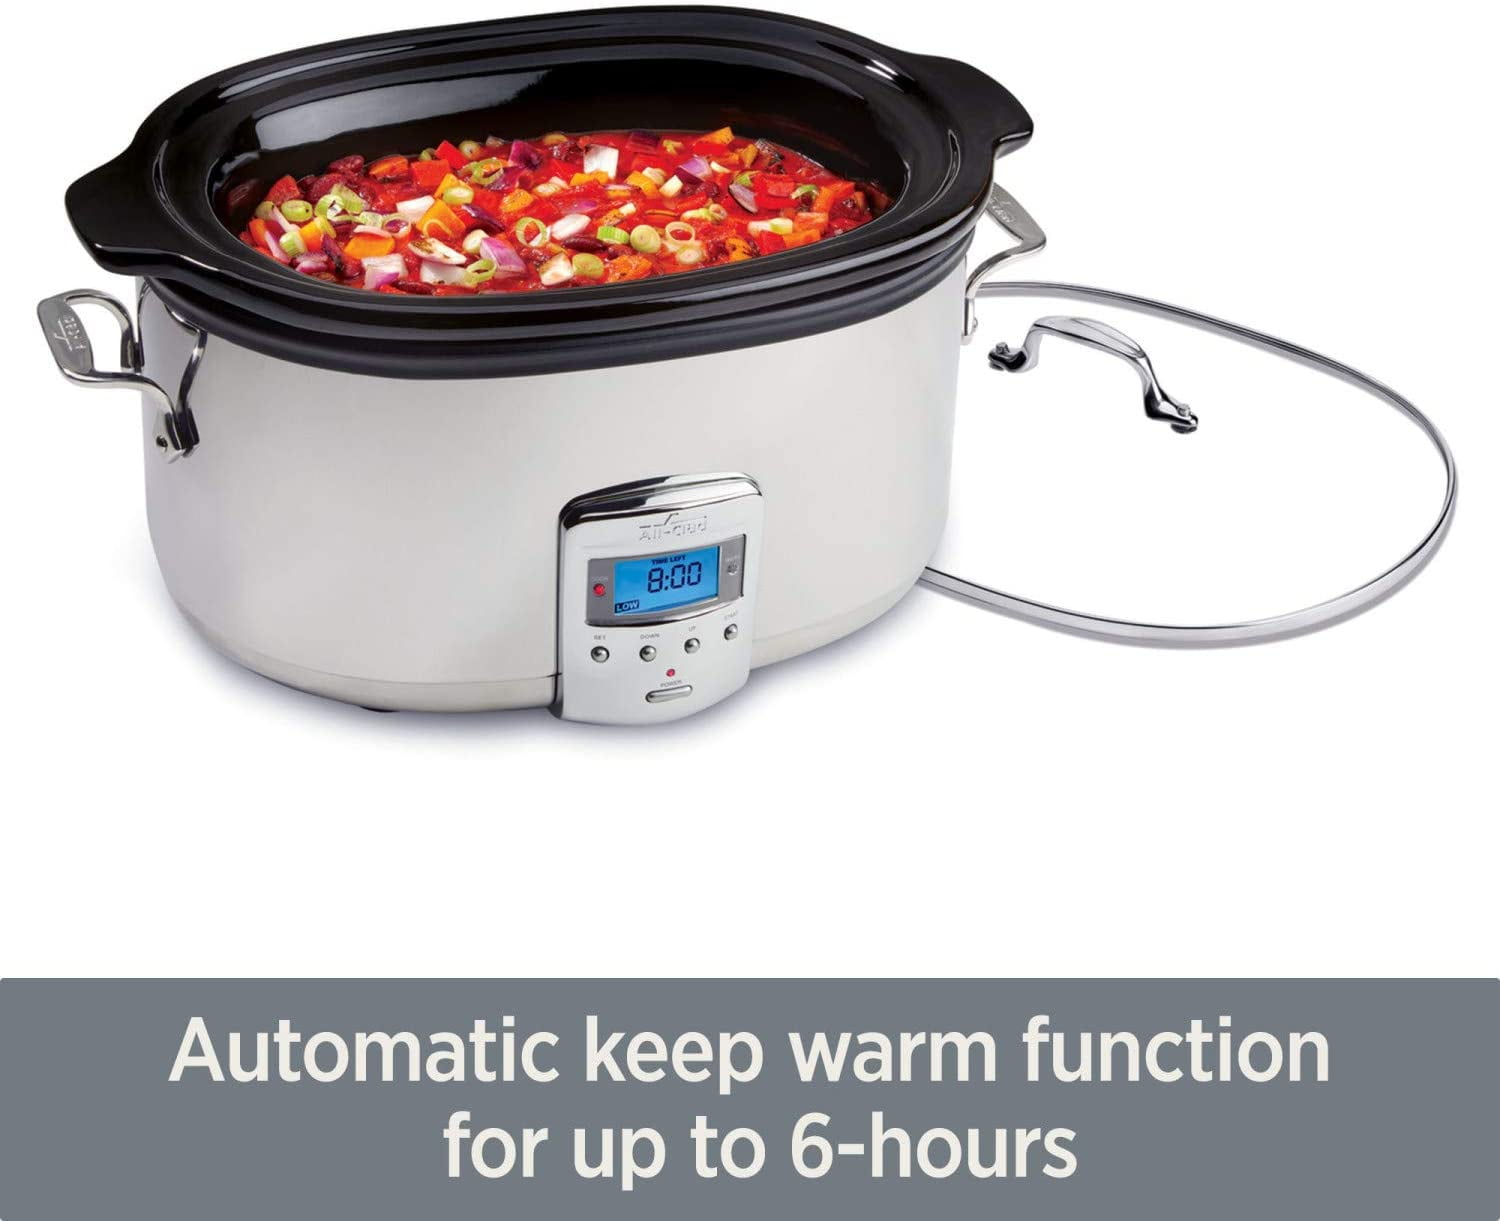 All-Clad Electric Slow Cooker with Black Ceramic Insert (99009) 